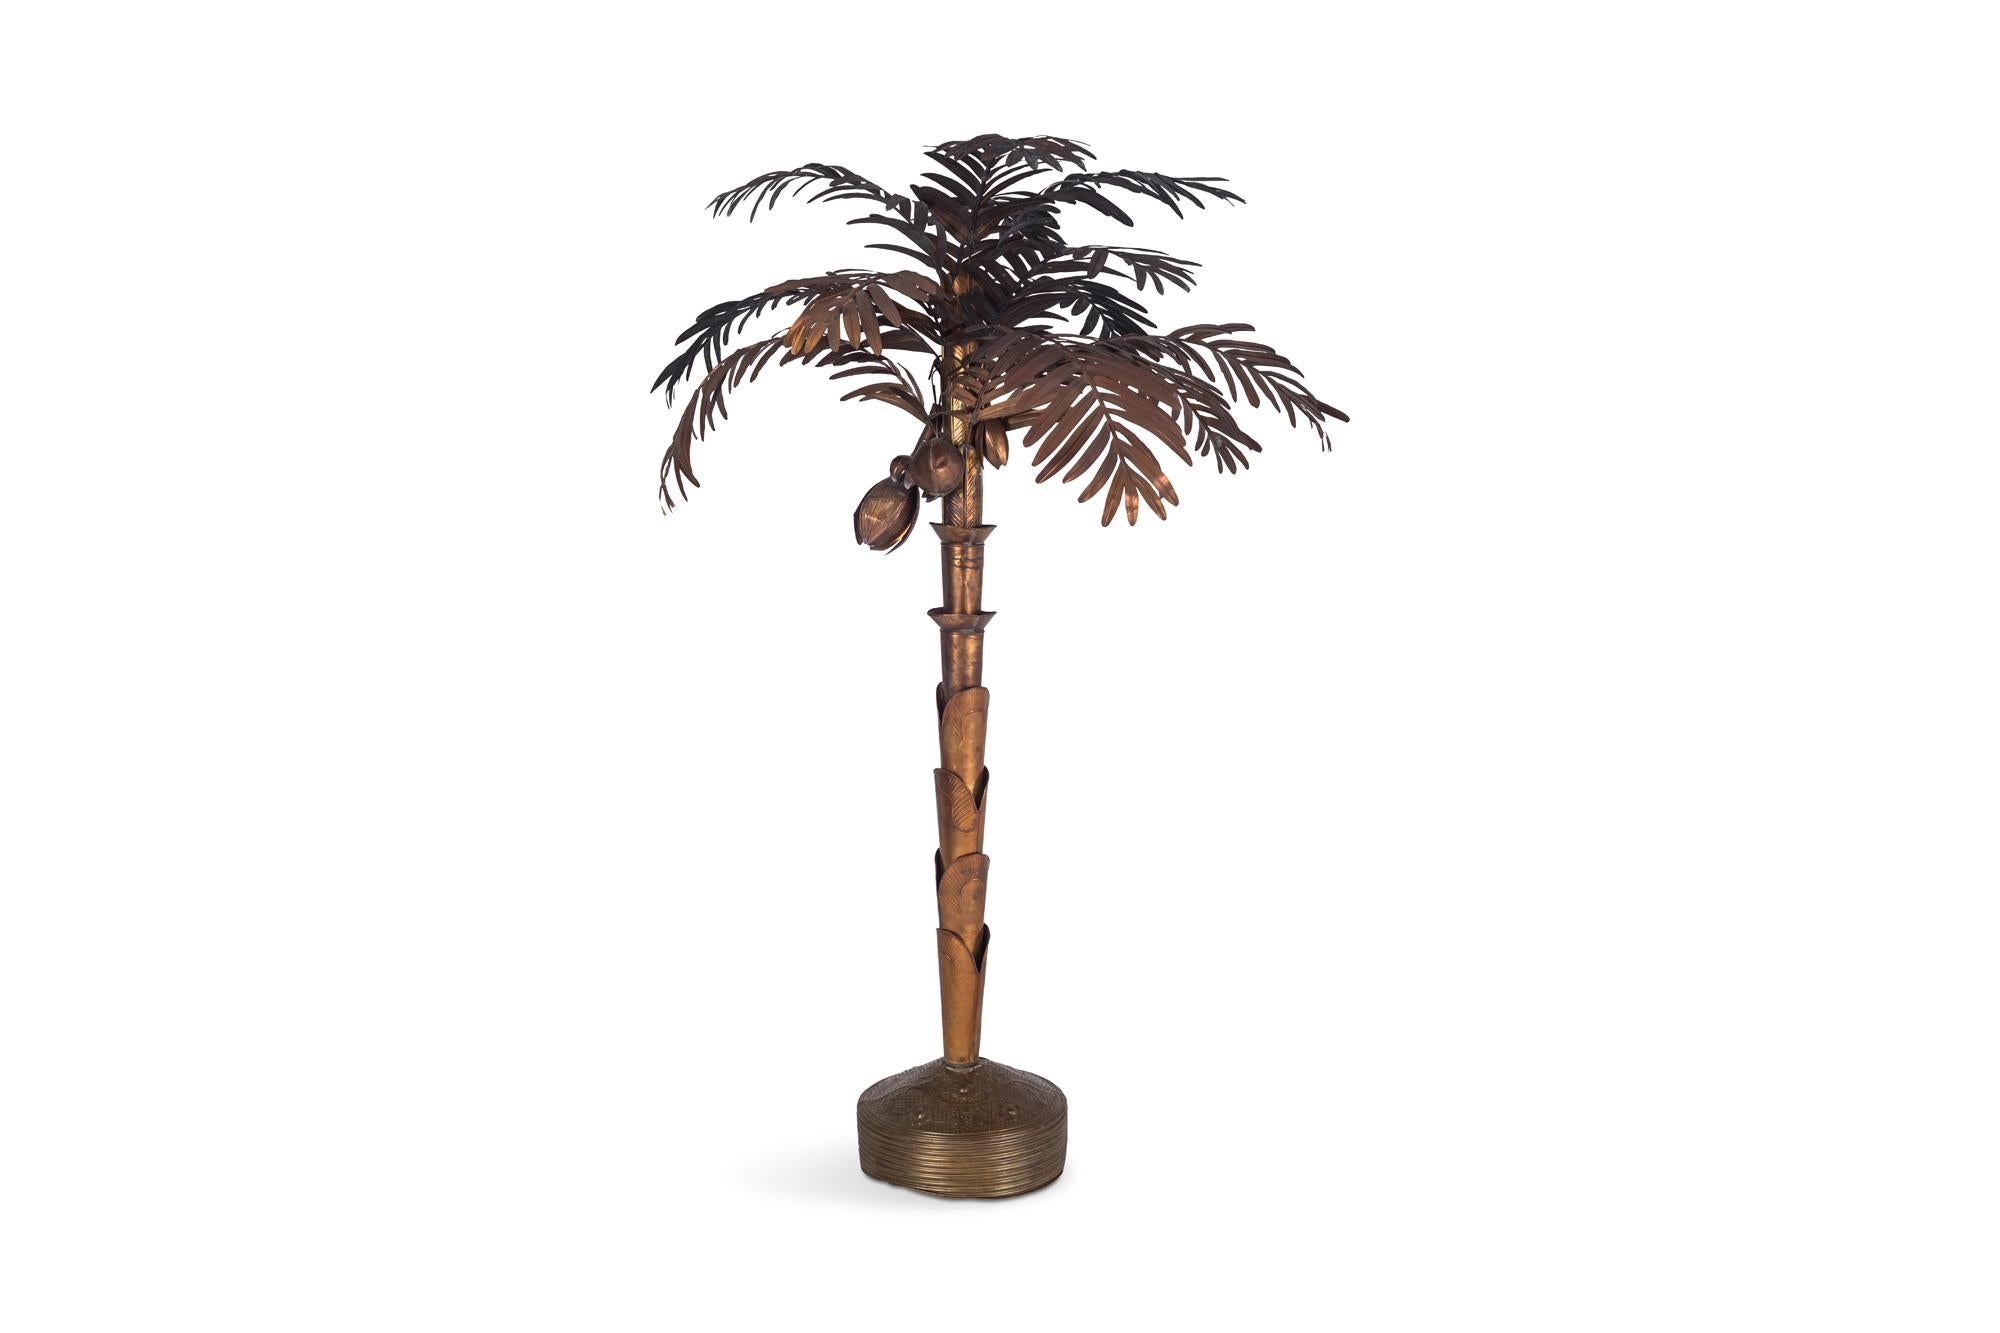 Hollywood Regency brass palm tree lamp in the style of Maison Jansen. This tall Hollywood Regency floor lamp has several extremely decorative details, such as the moulded base and the well-crafted plates of the stem.
The lamp is fitted with an